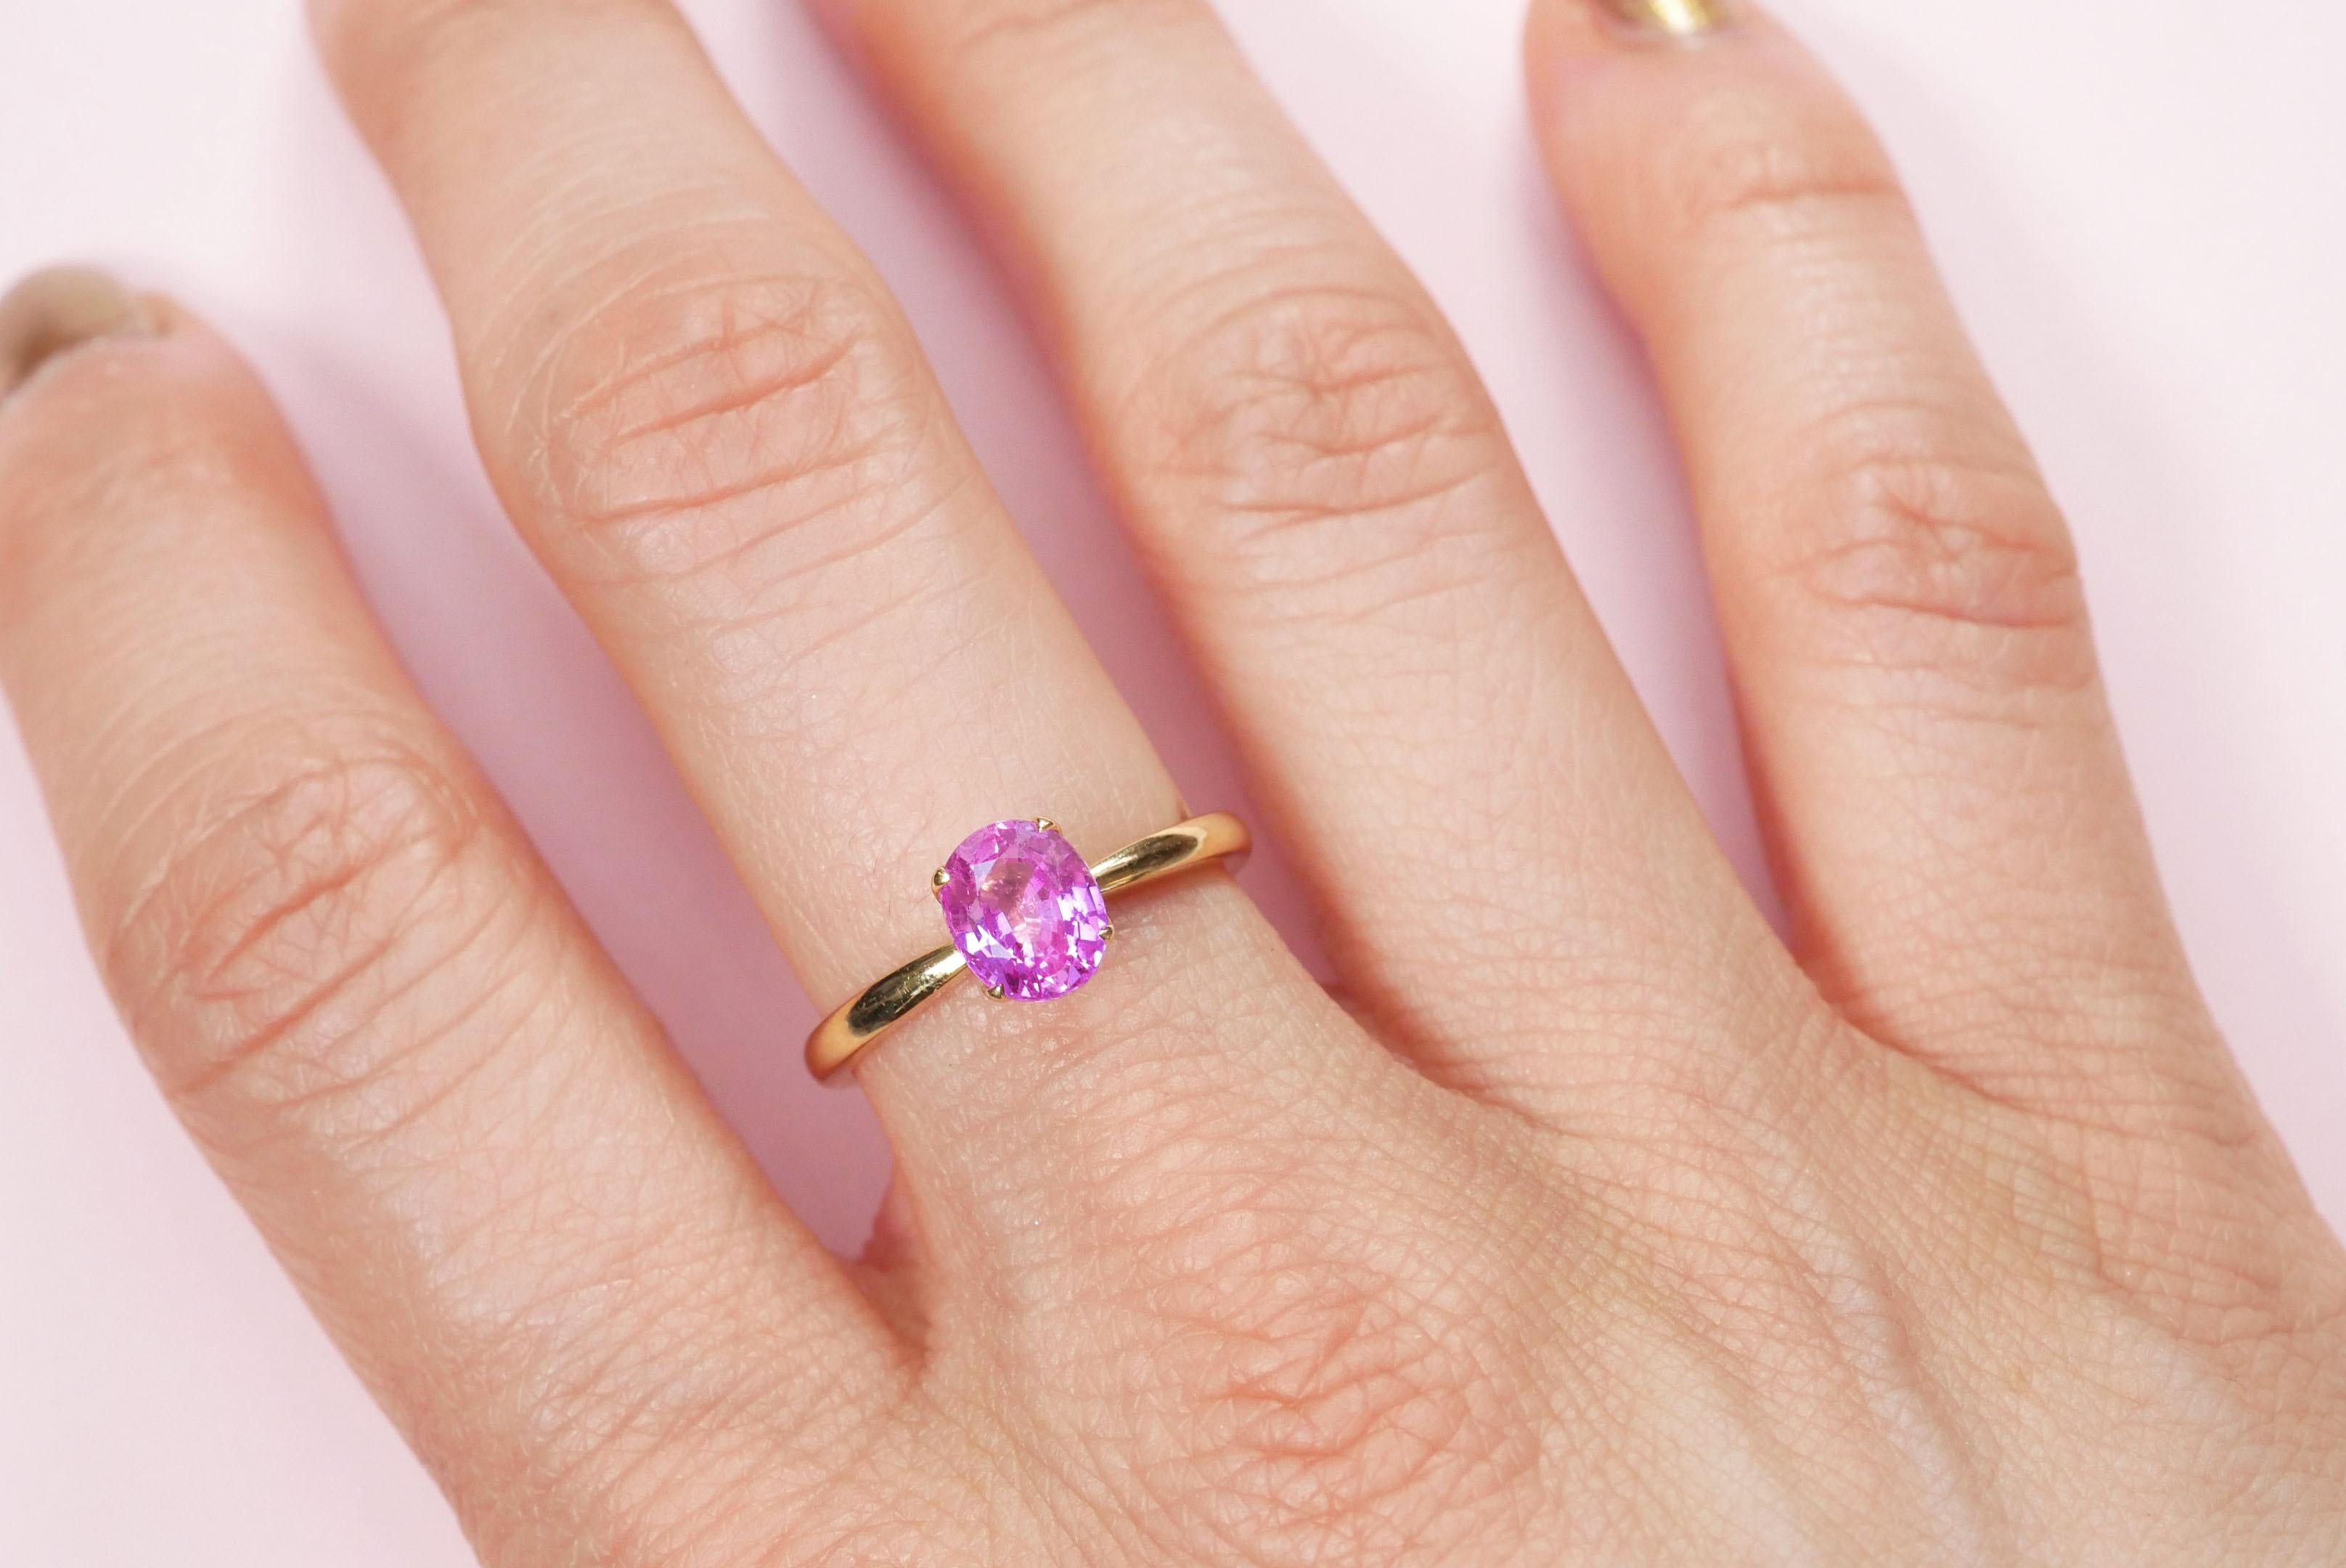 This elegant blossom solitaire ring combines beauty and style. It can be worn both casually, or more formally and can be worn on its own, or layered with other rings. The 1.25 ct pink sapphire is set in 18k yellow gold, in the blossom collection’s